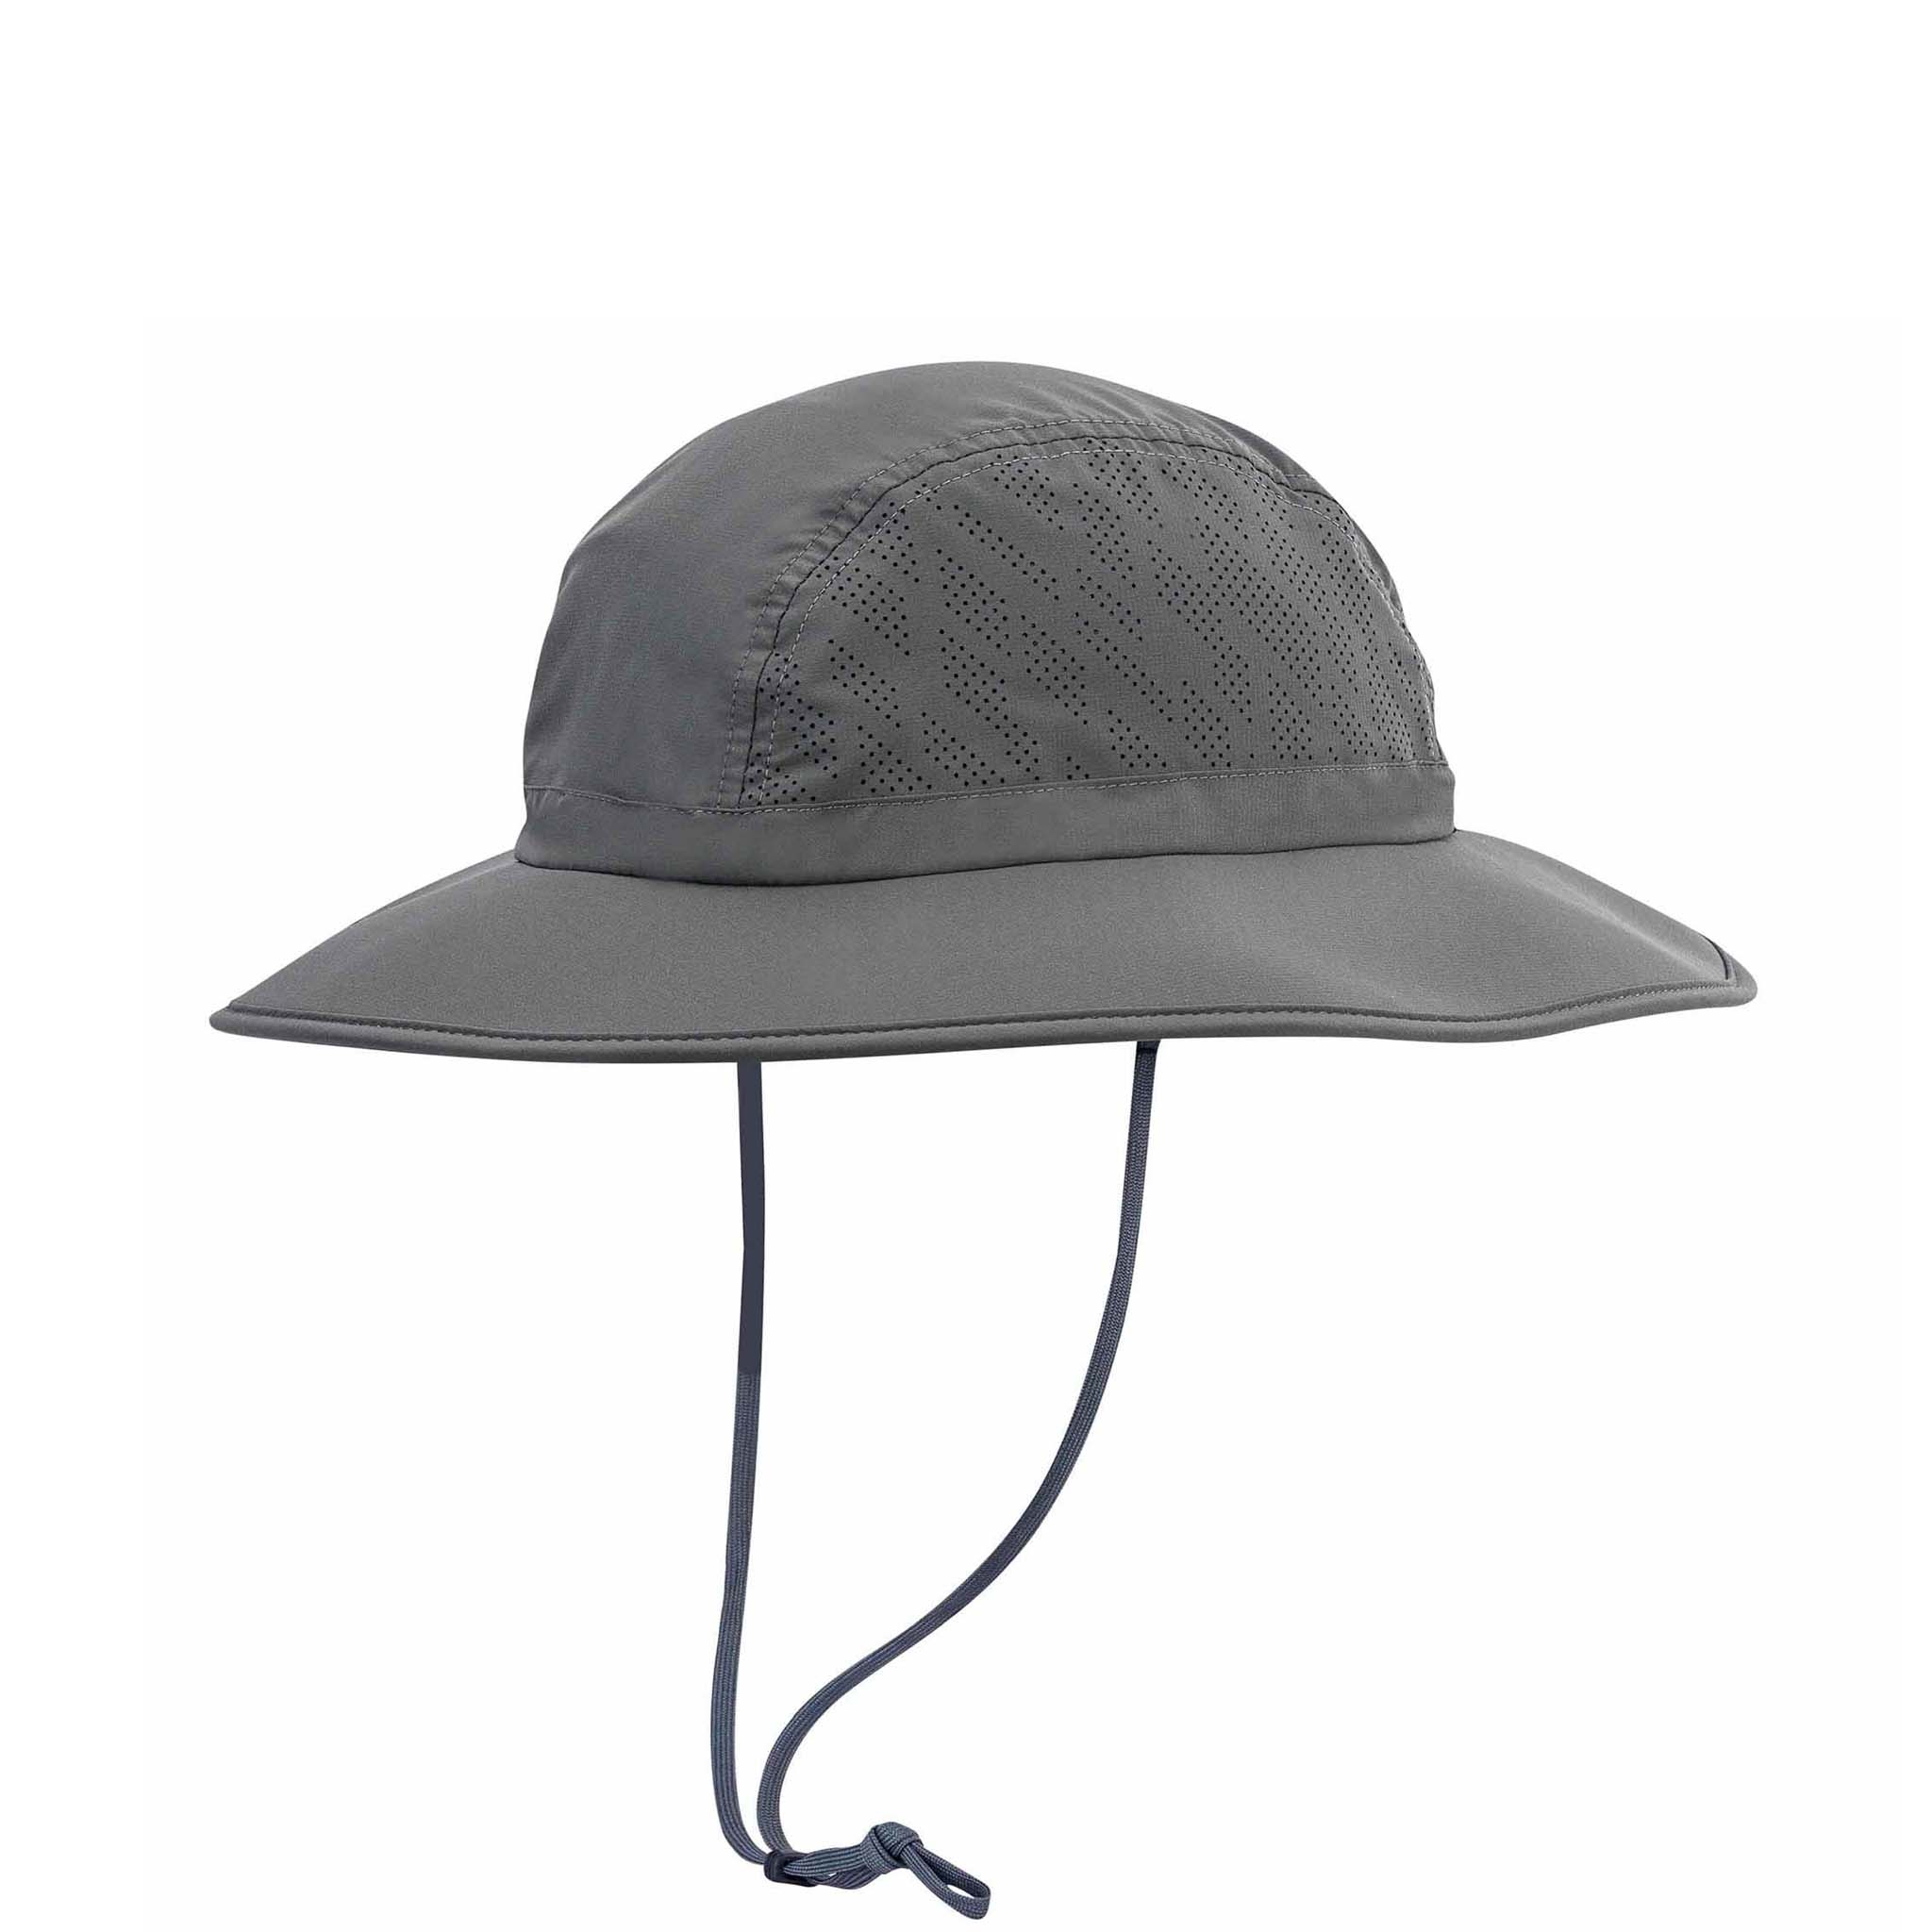 UPF 50+ Hats For Your Sun Protection